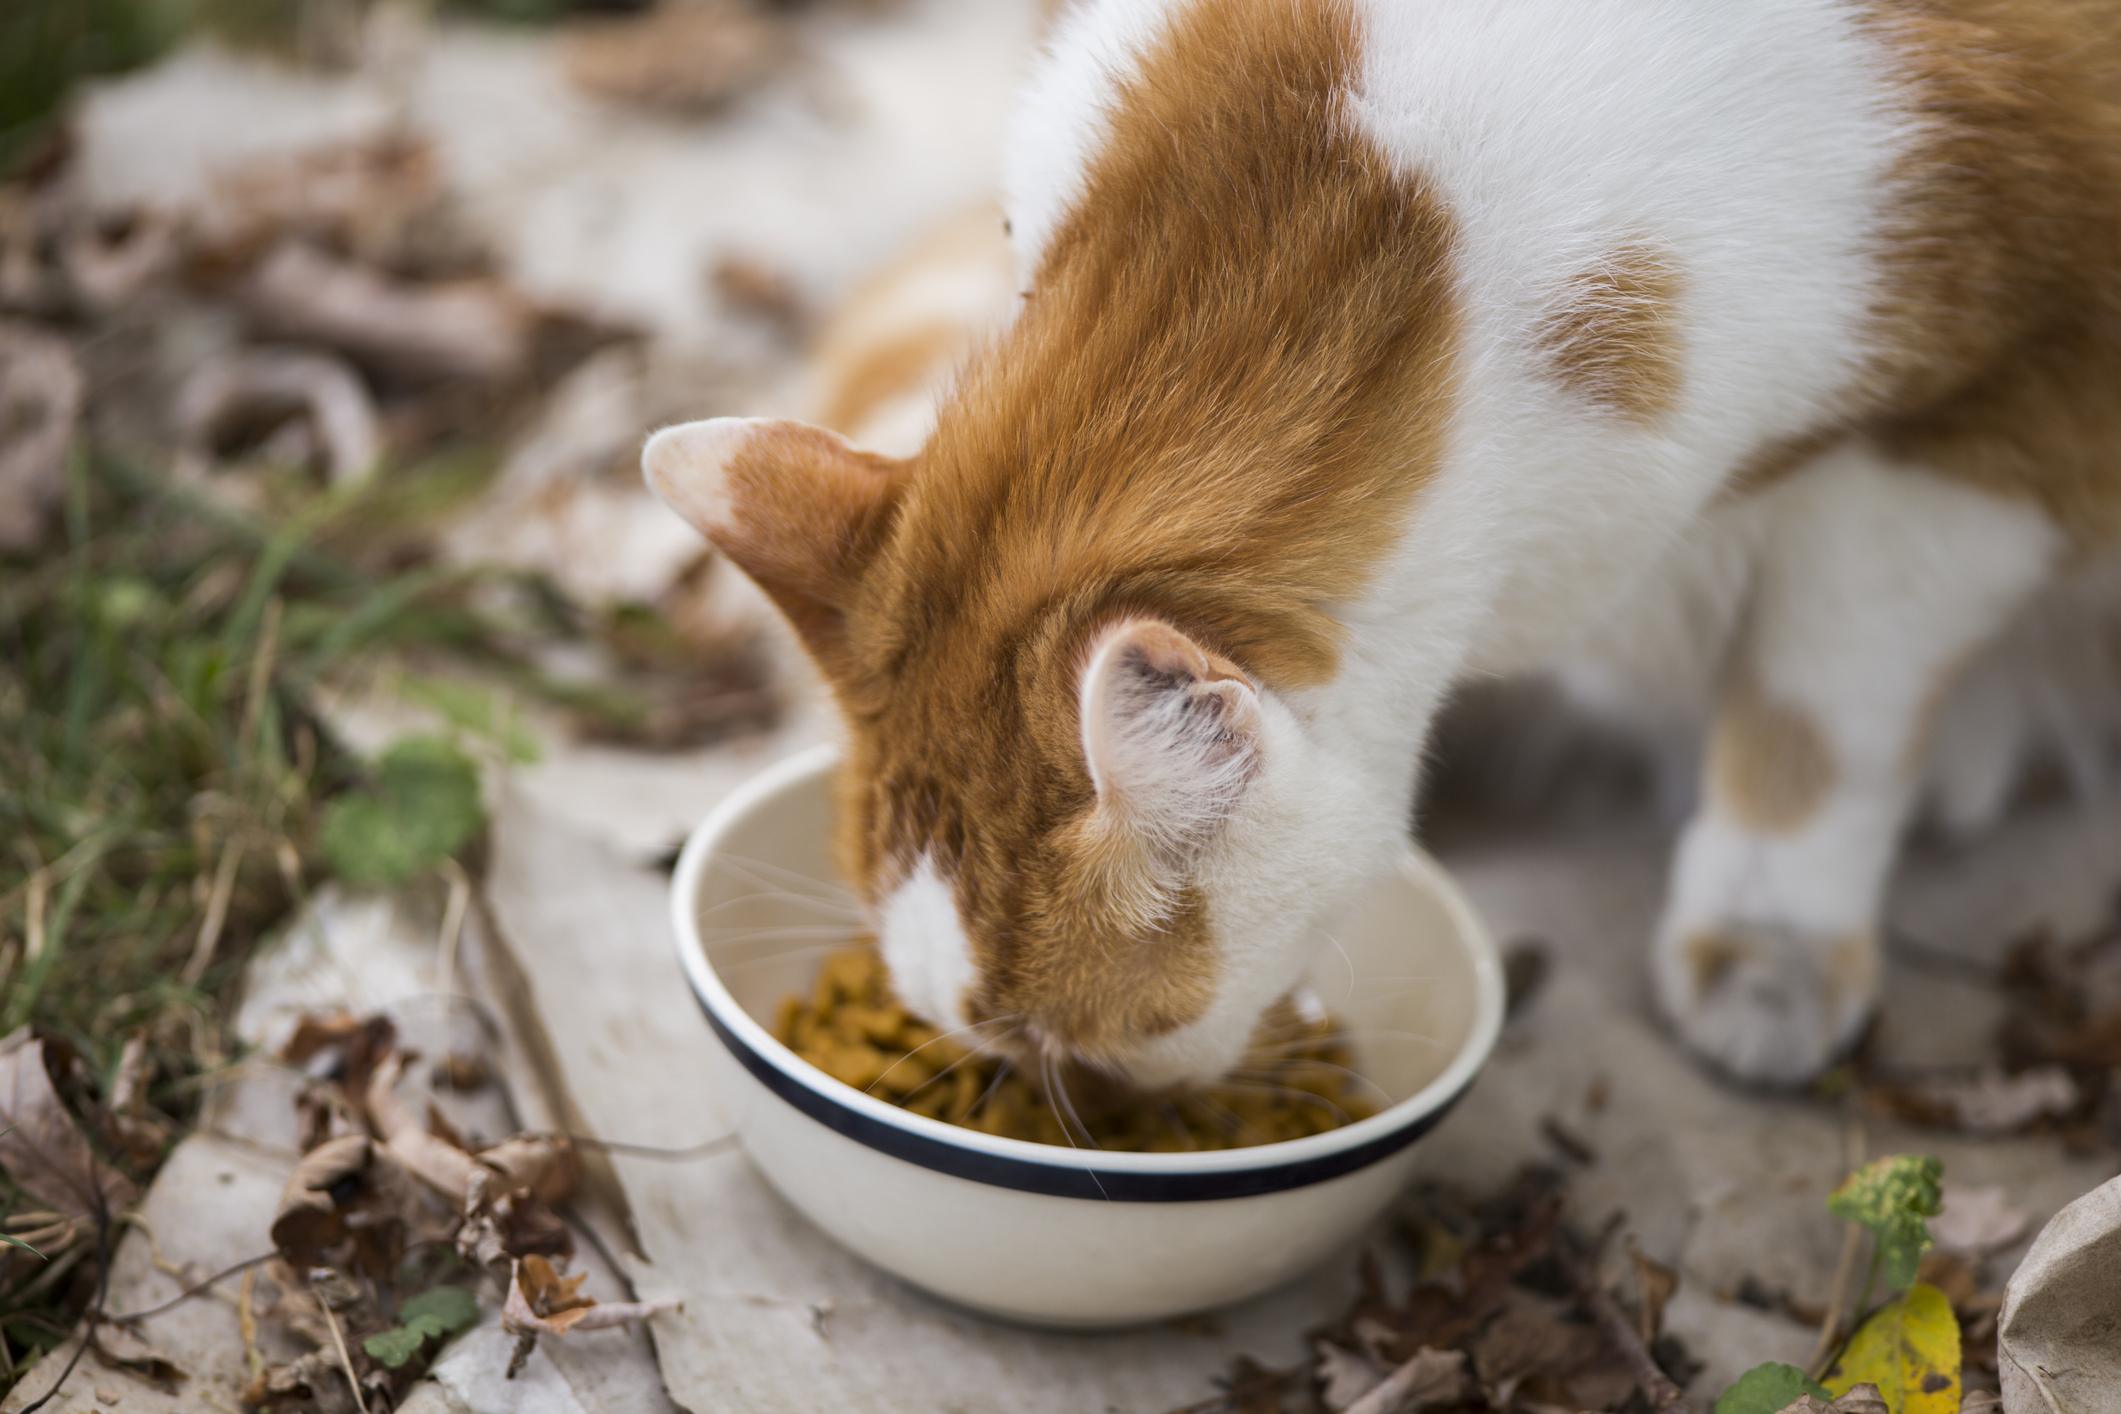 A cat eats cat food in a backyard on a fall day